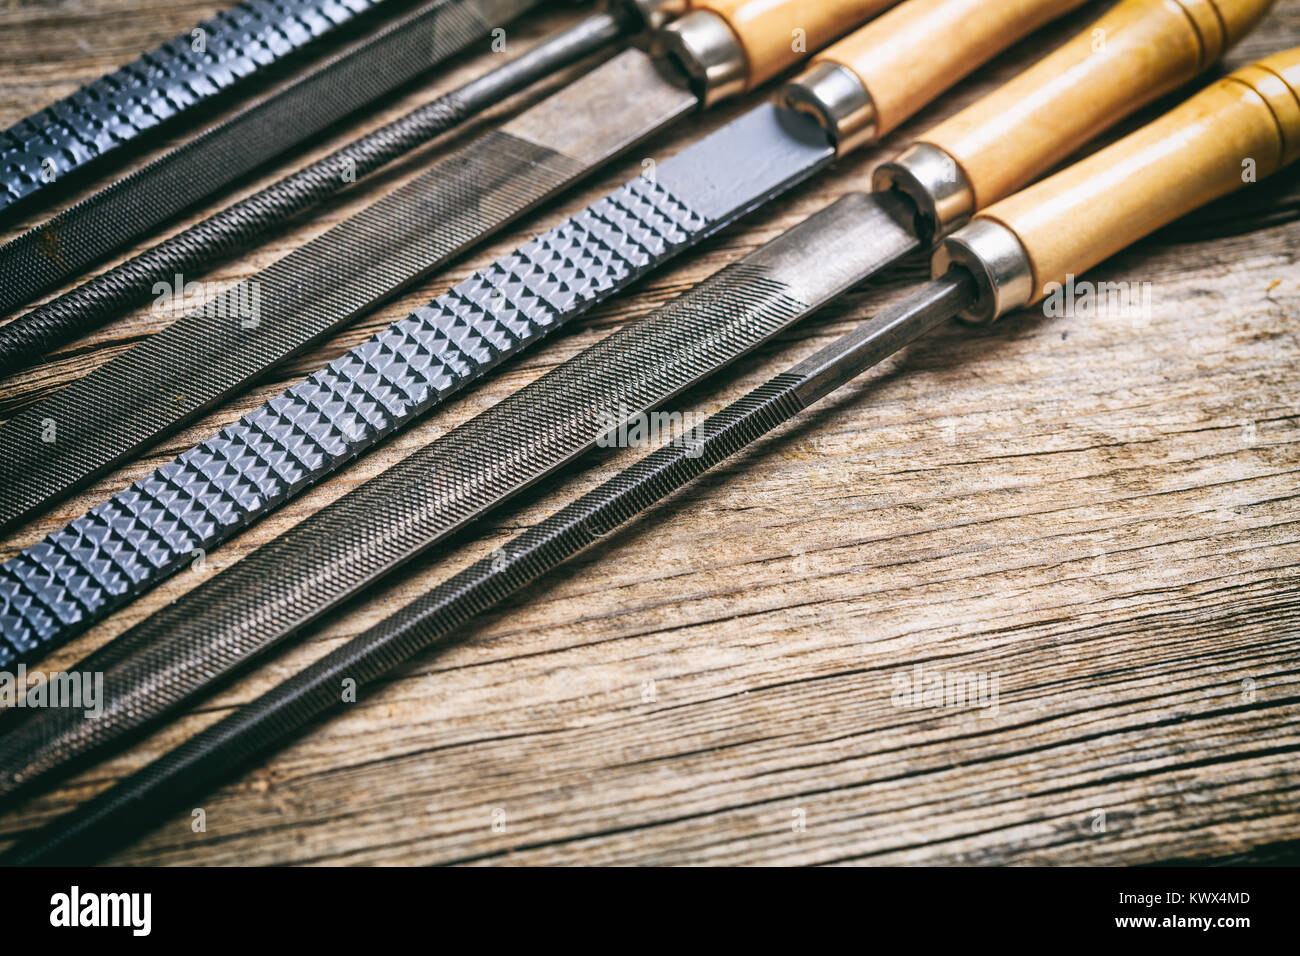 Old hand tools on a wooden background Stock Photo